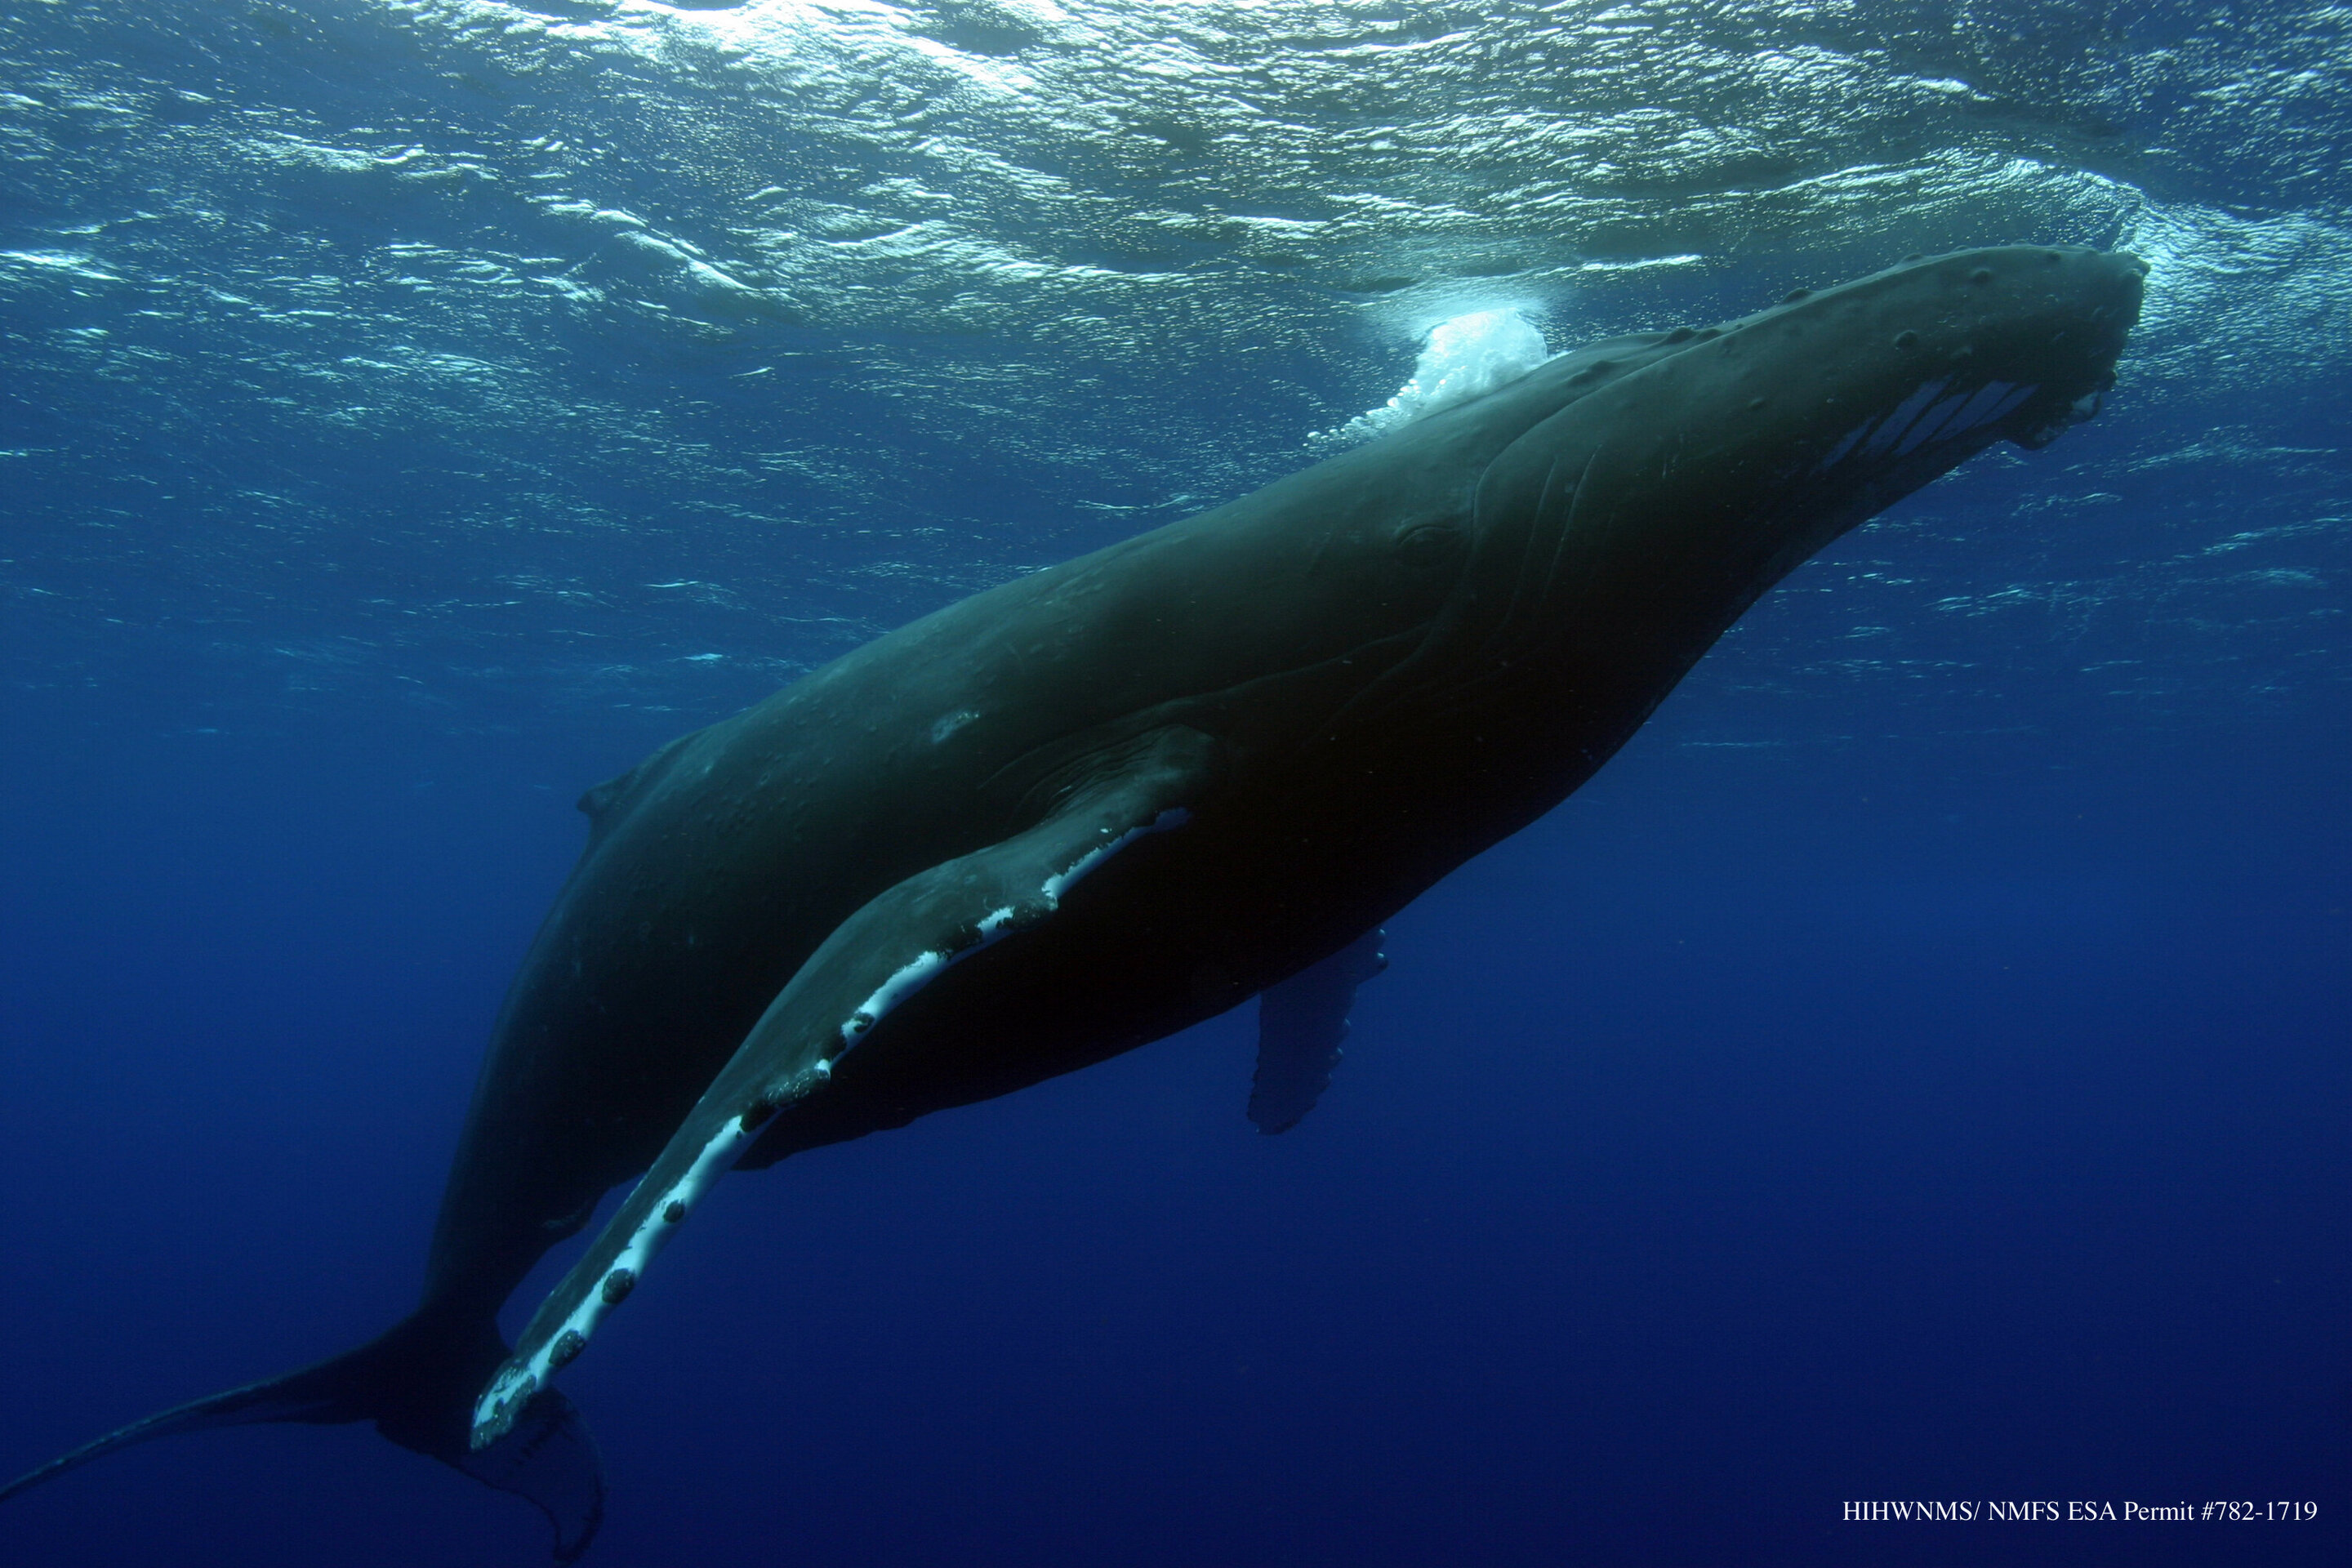 Humpback whale songs provide insight to population changes
